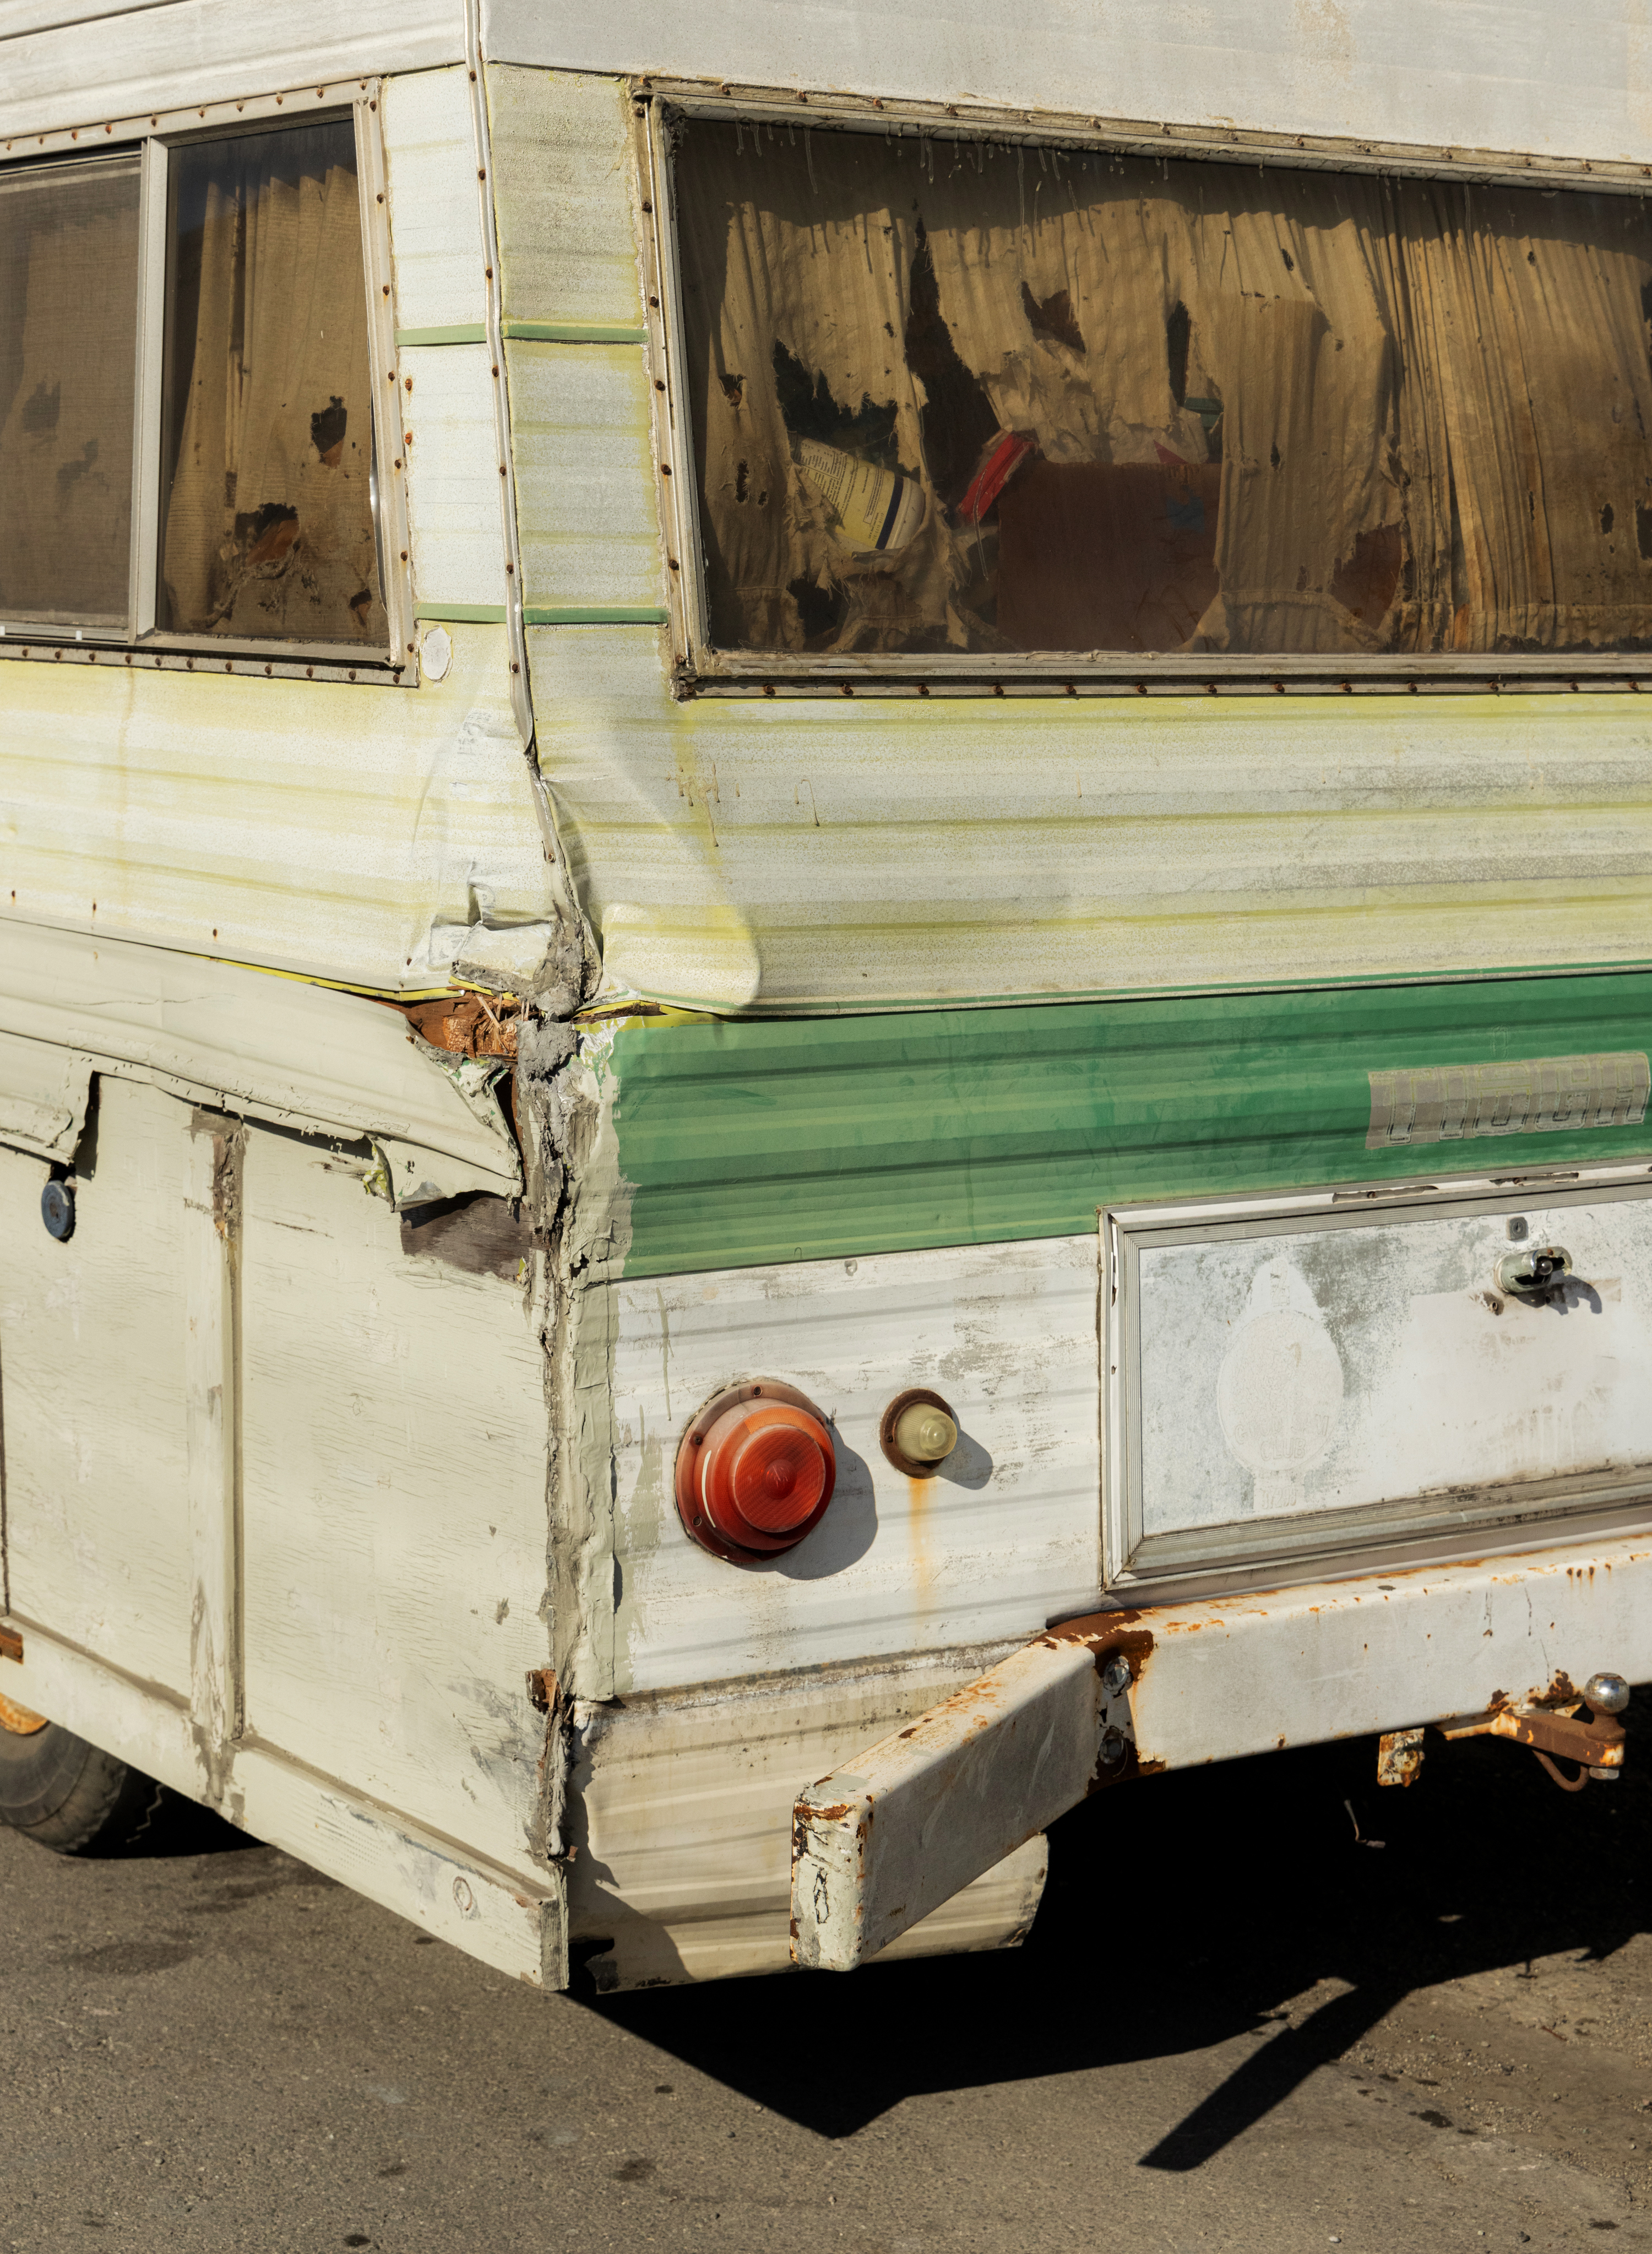 The image shows the damaged rear corner of an old camper, with dented panels, rust, and broken taillights. The windows have torn curtains inside.